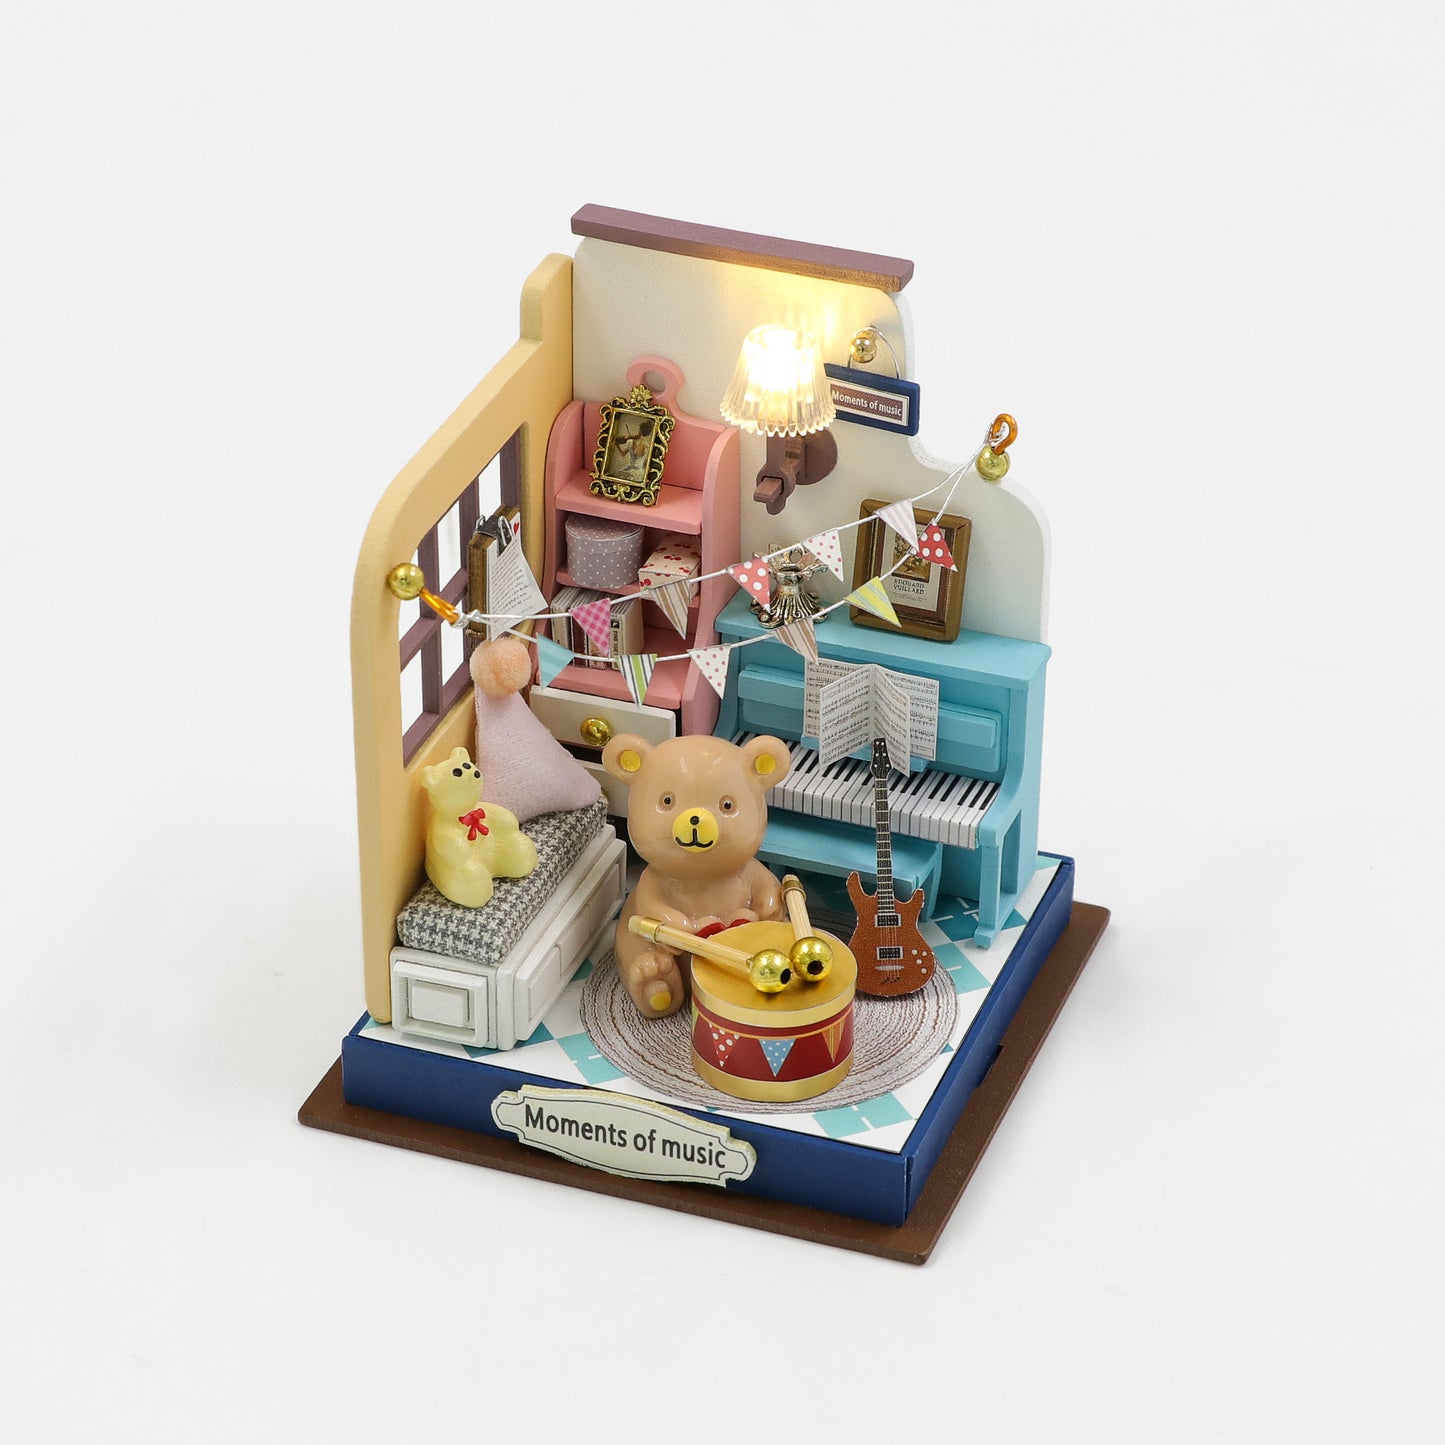 DIY "Moments of Music" S2303 Dollhouse Furniture Wooden Miniature Dollhouse w/ LEDs and Dust Proof Cover Toy Kits Fun Crafts